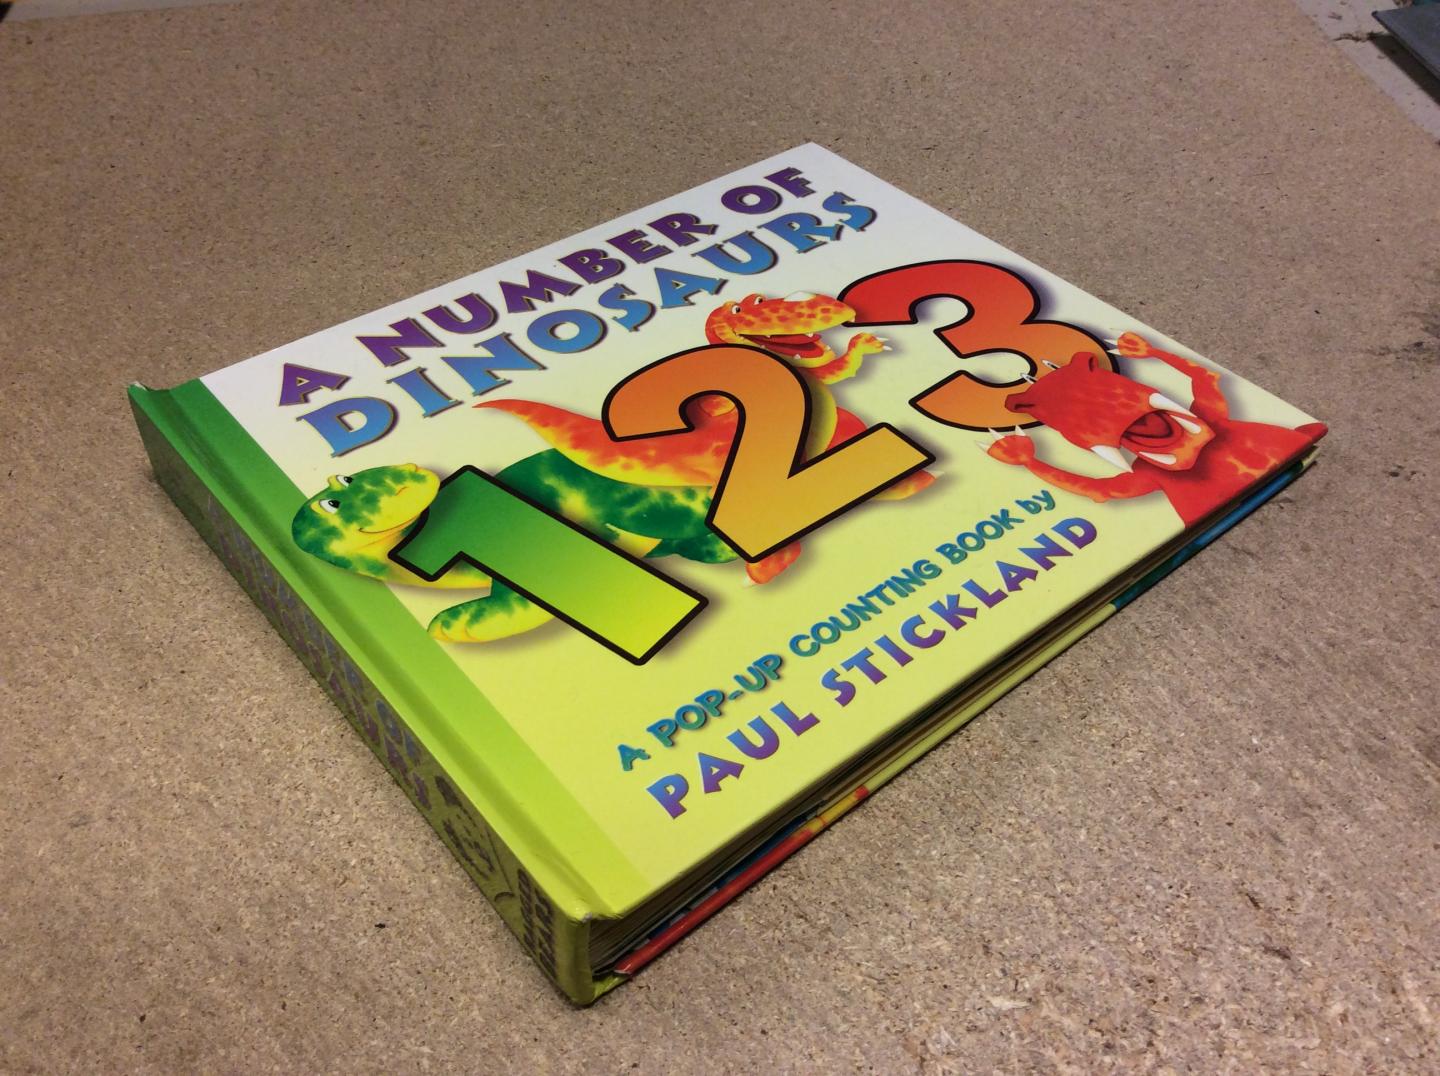 Stickland, Paul - A Number of Dinosaurs. A pop-up counting book